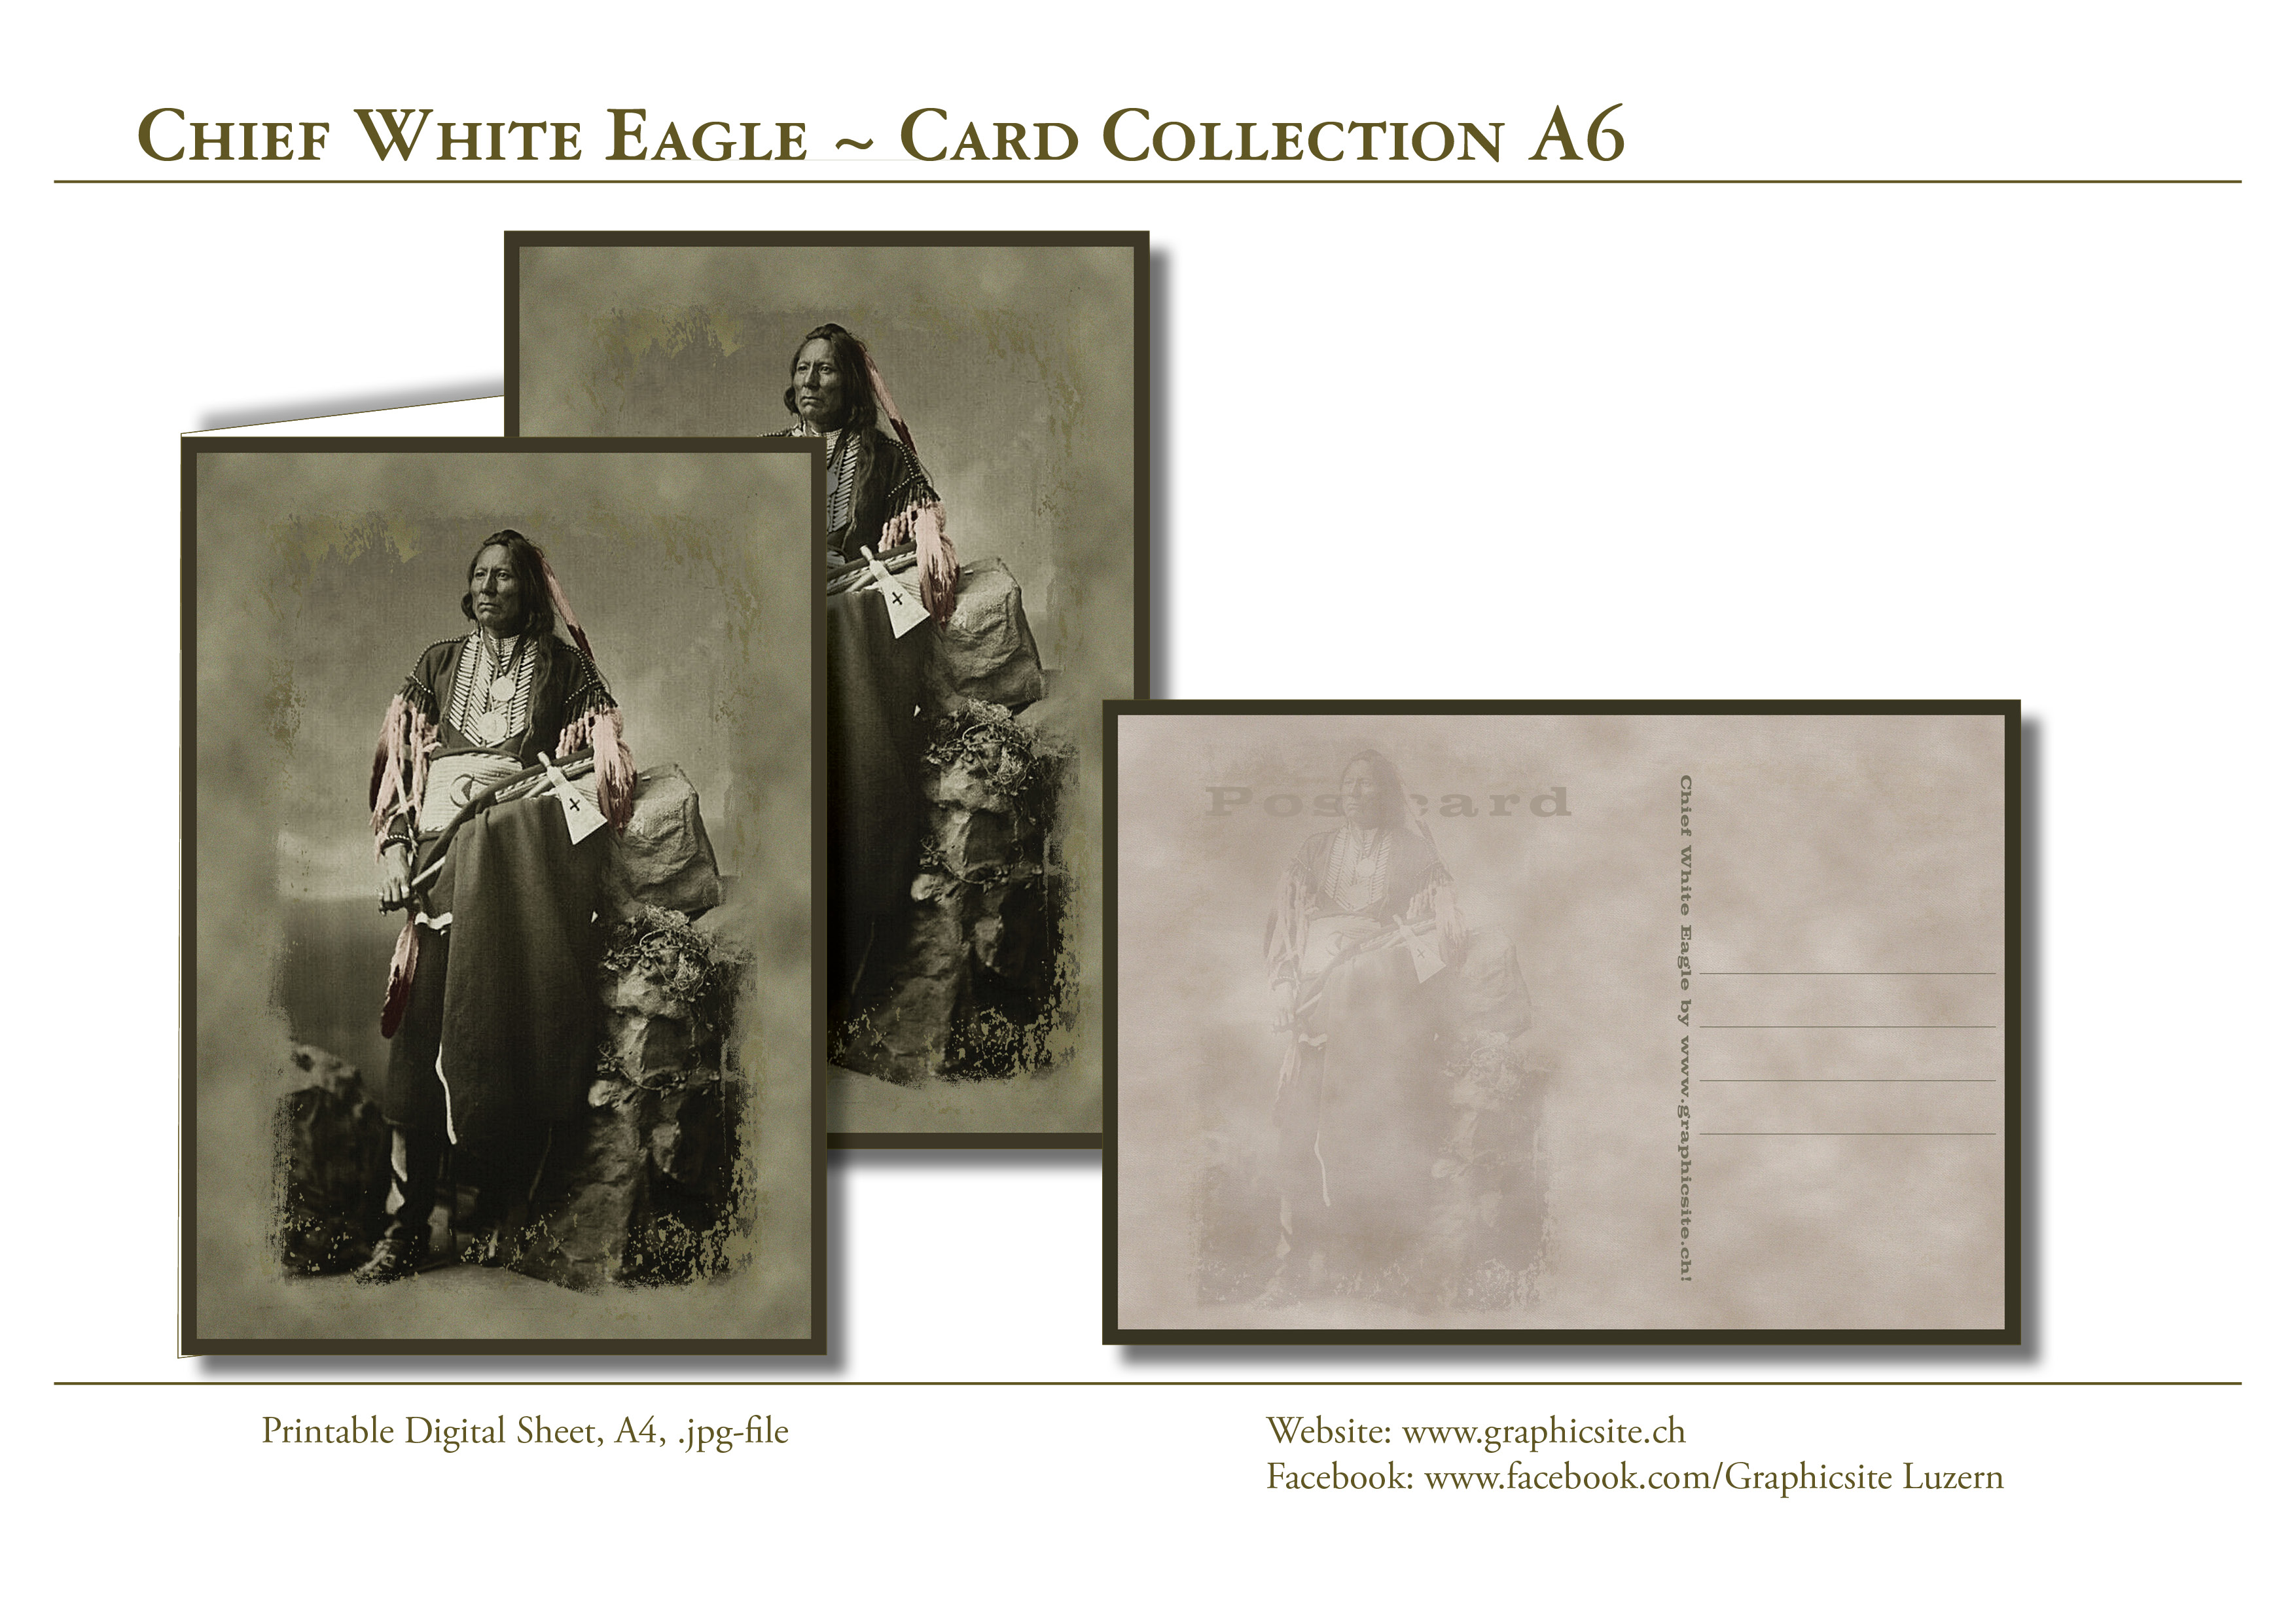 Printable Digital Sheets - Greeting Cards, Postcard, Native American Indian, Chief, White Eagle, Vintage, Feathers,